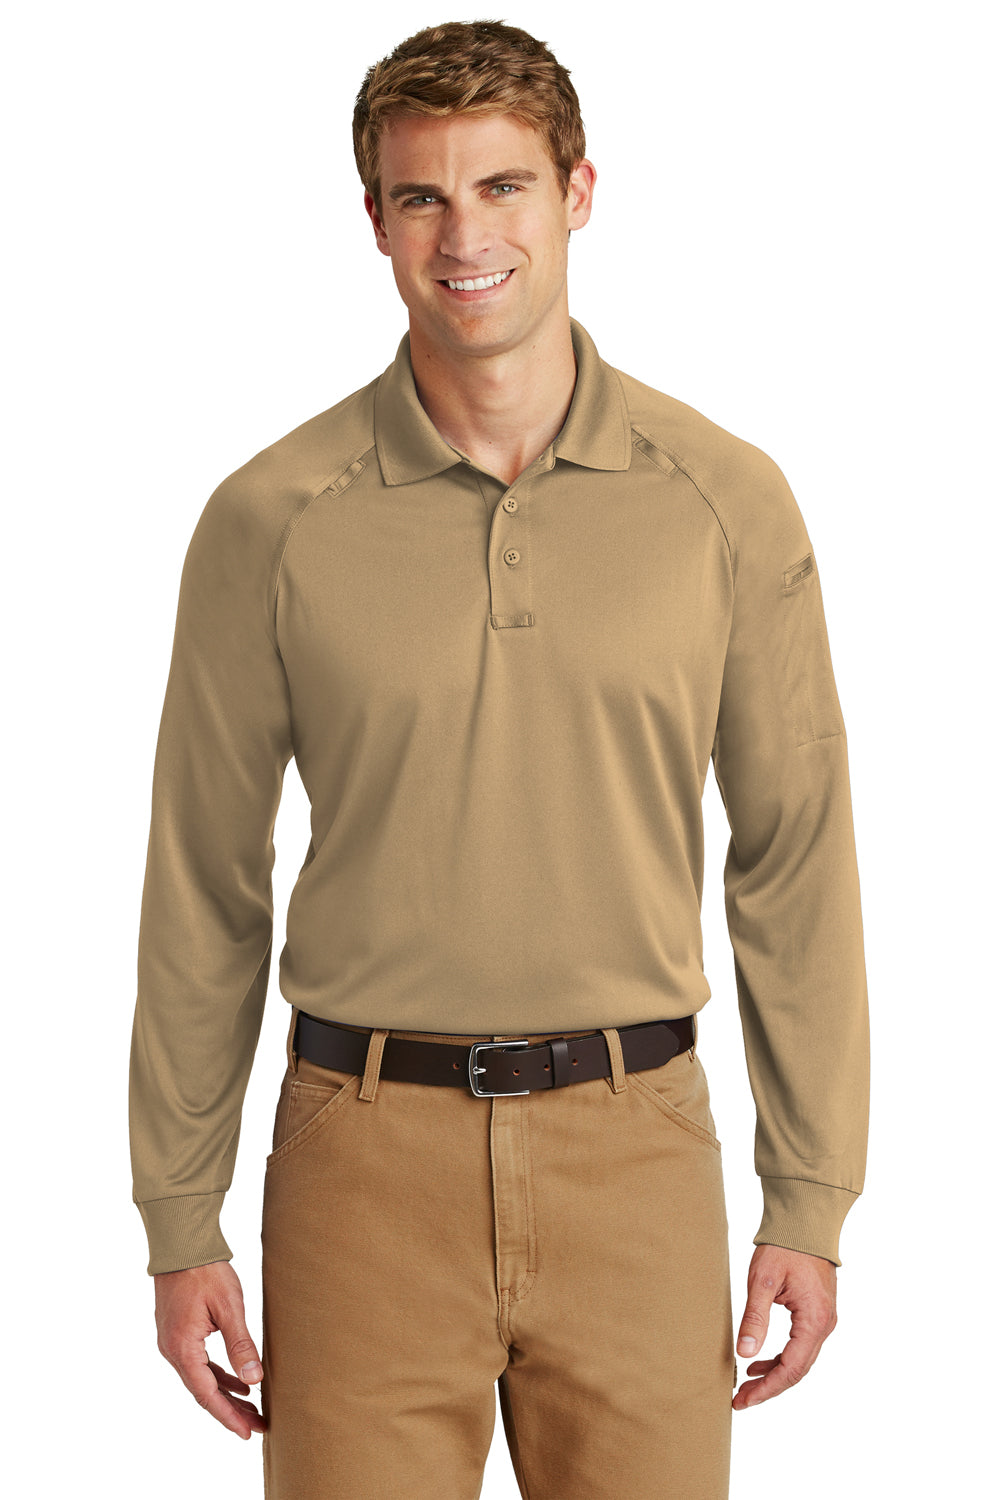 CornerStone CS410LS Mens Select Tactical Moisture Wicking Long Sleeve Polo Shirt Tan Brown Front